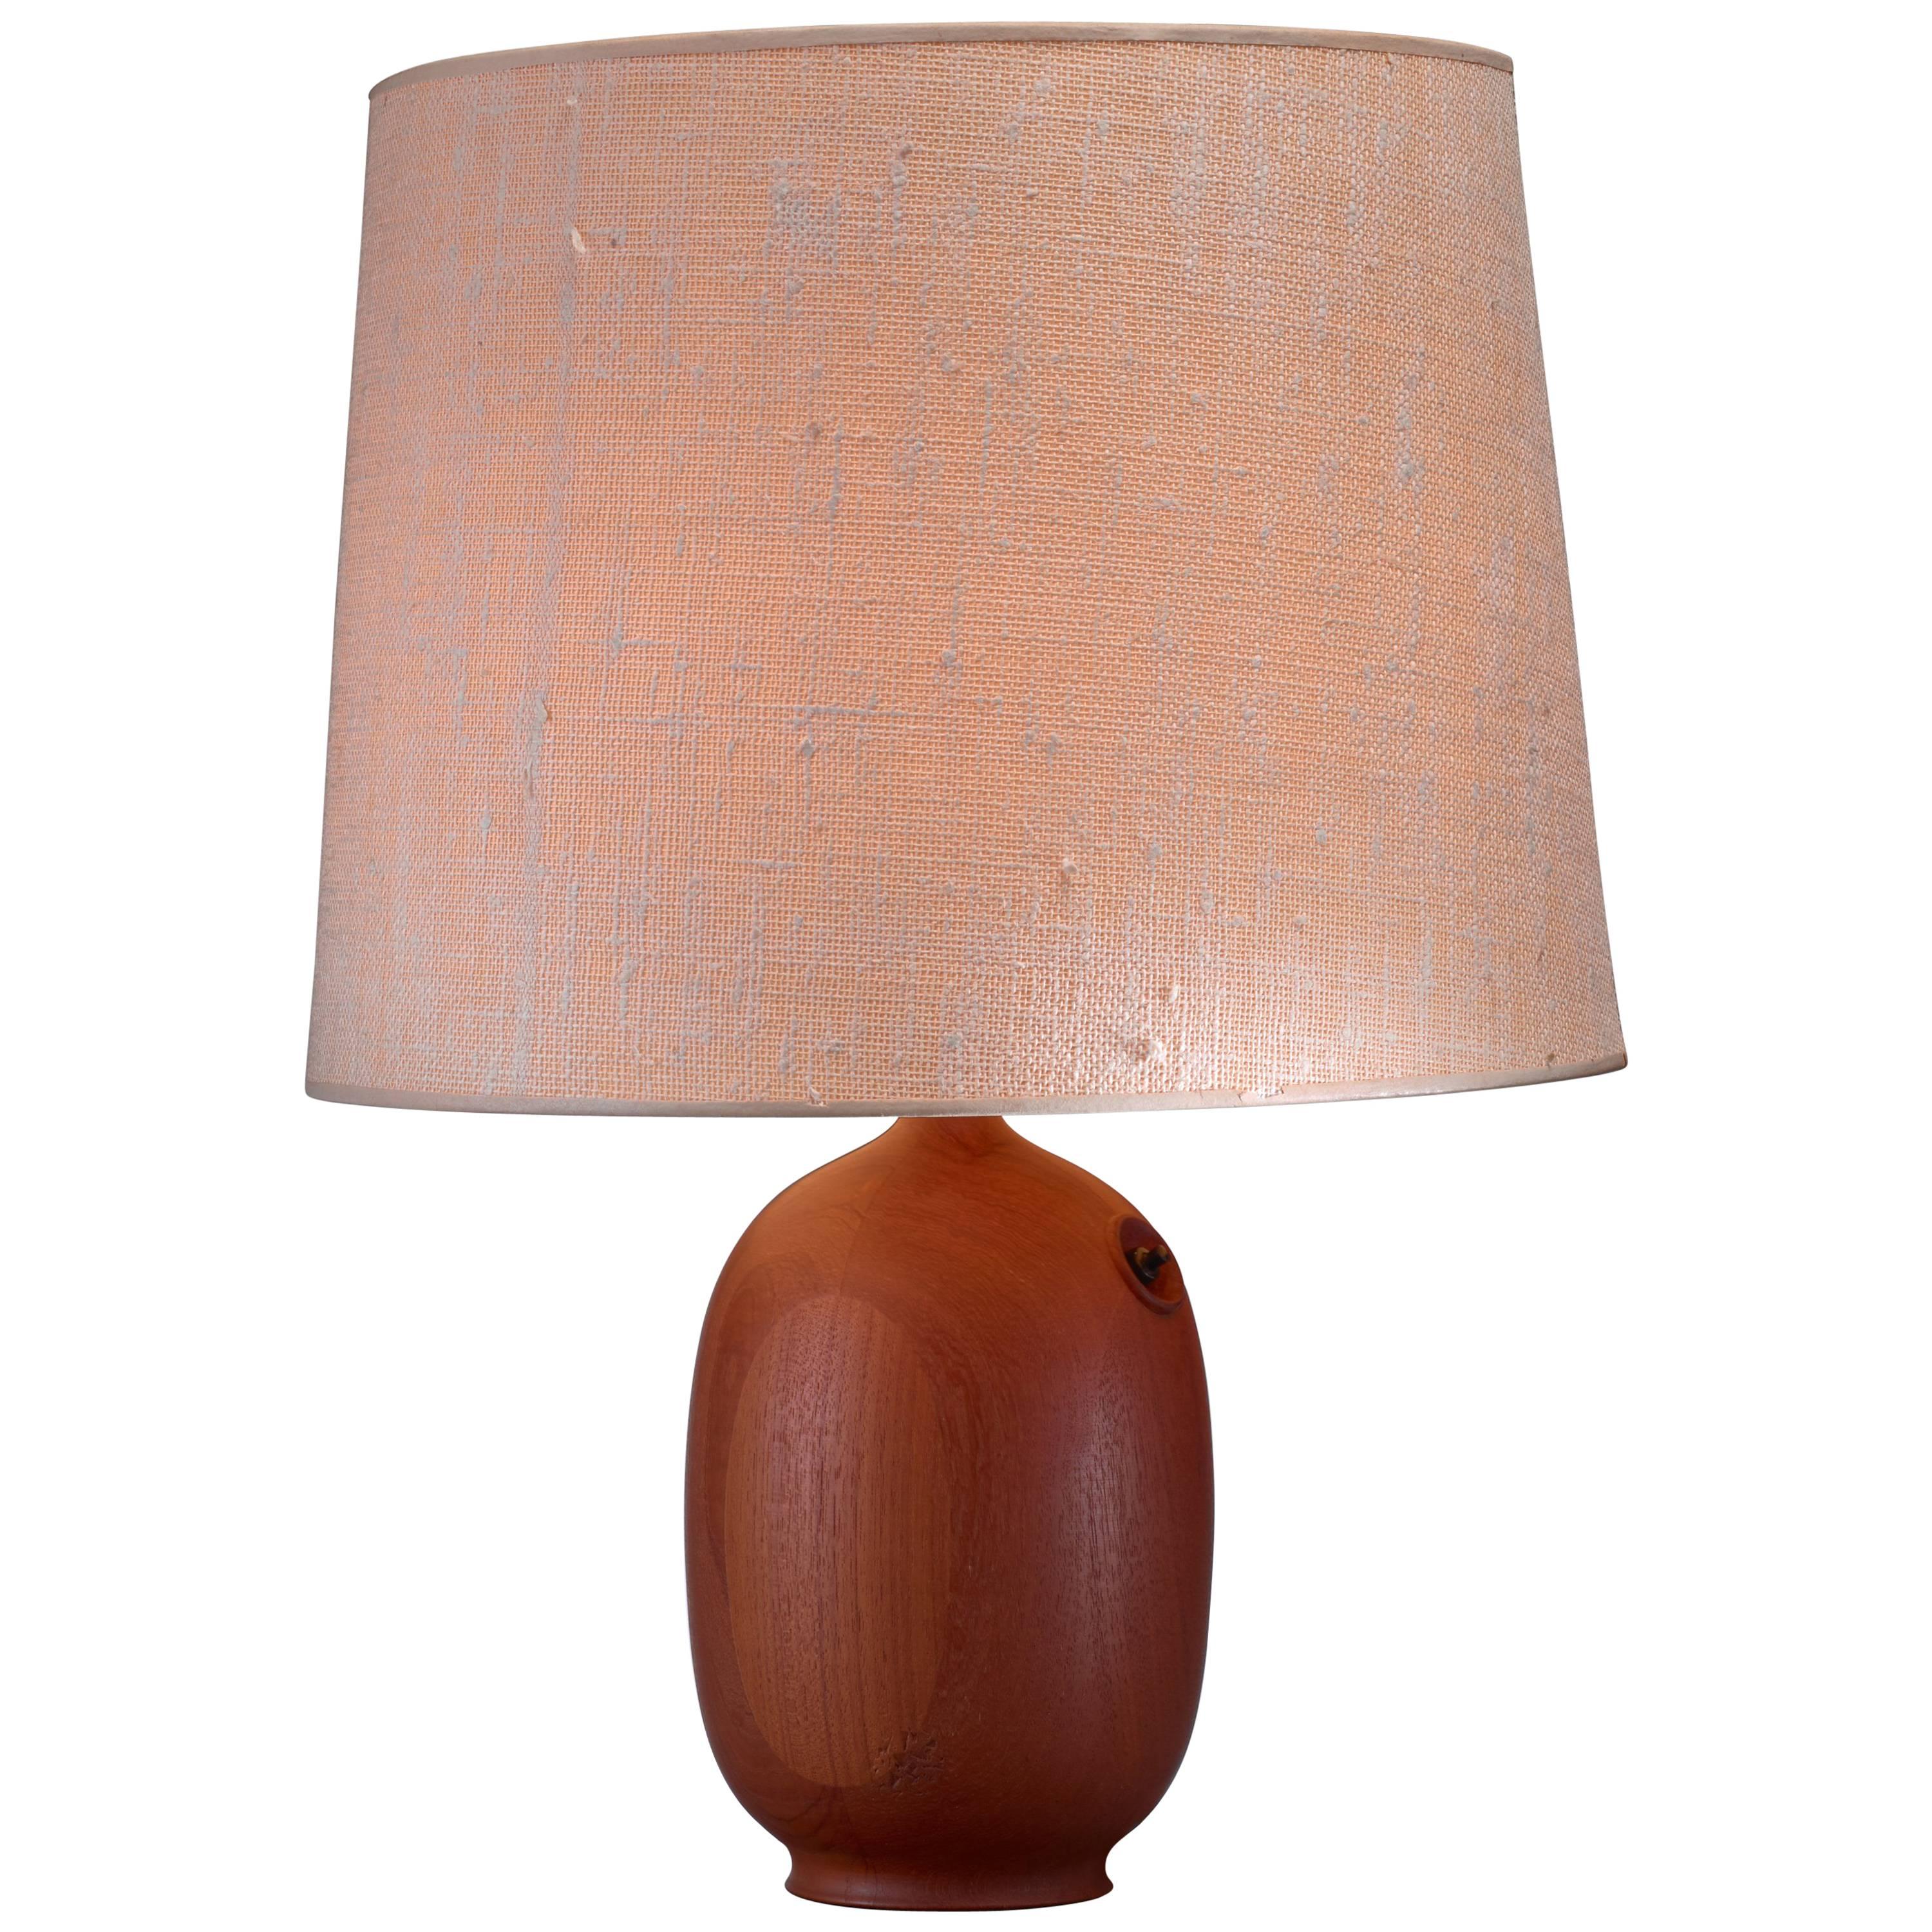 Danish Wooden Vase Shaped Table Lamp, 1960s For Sale